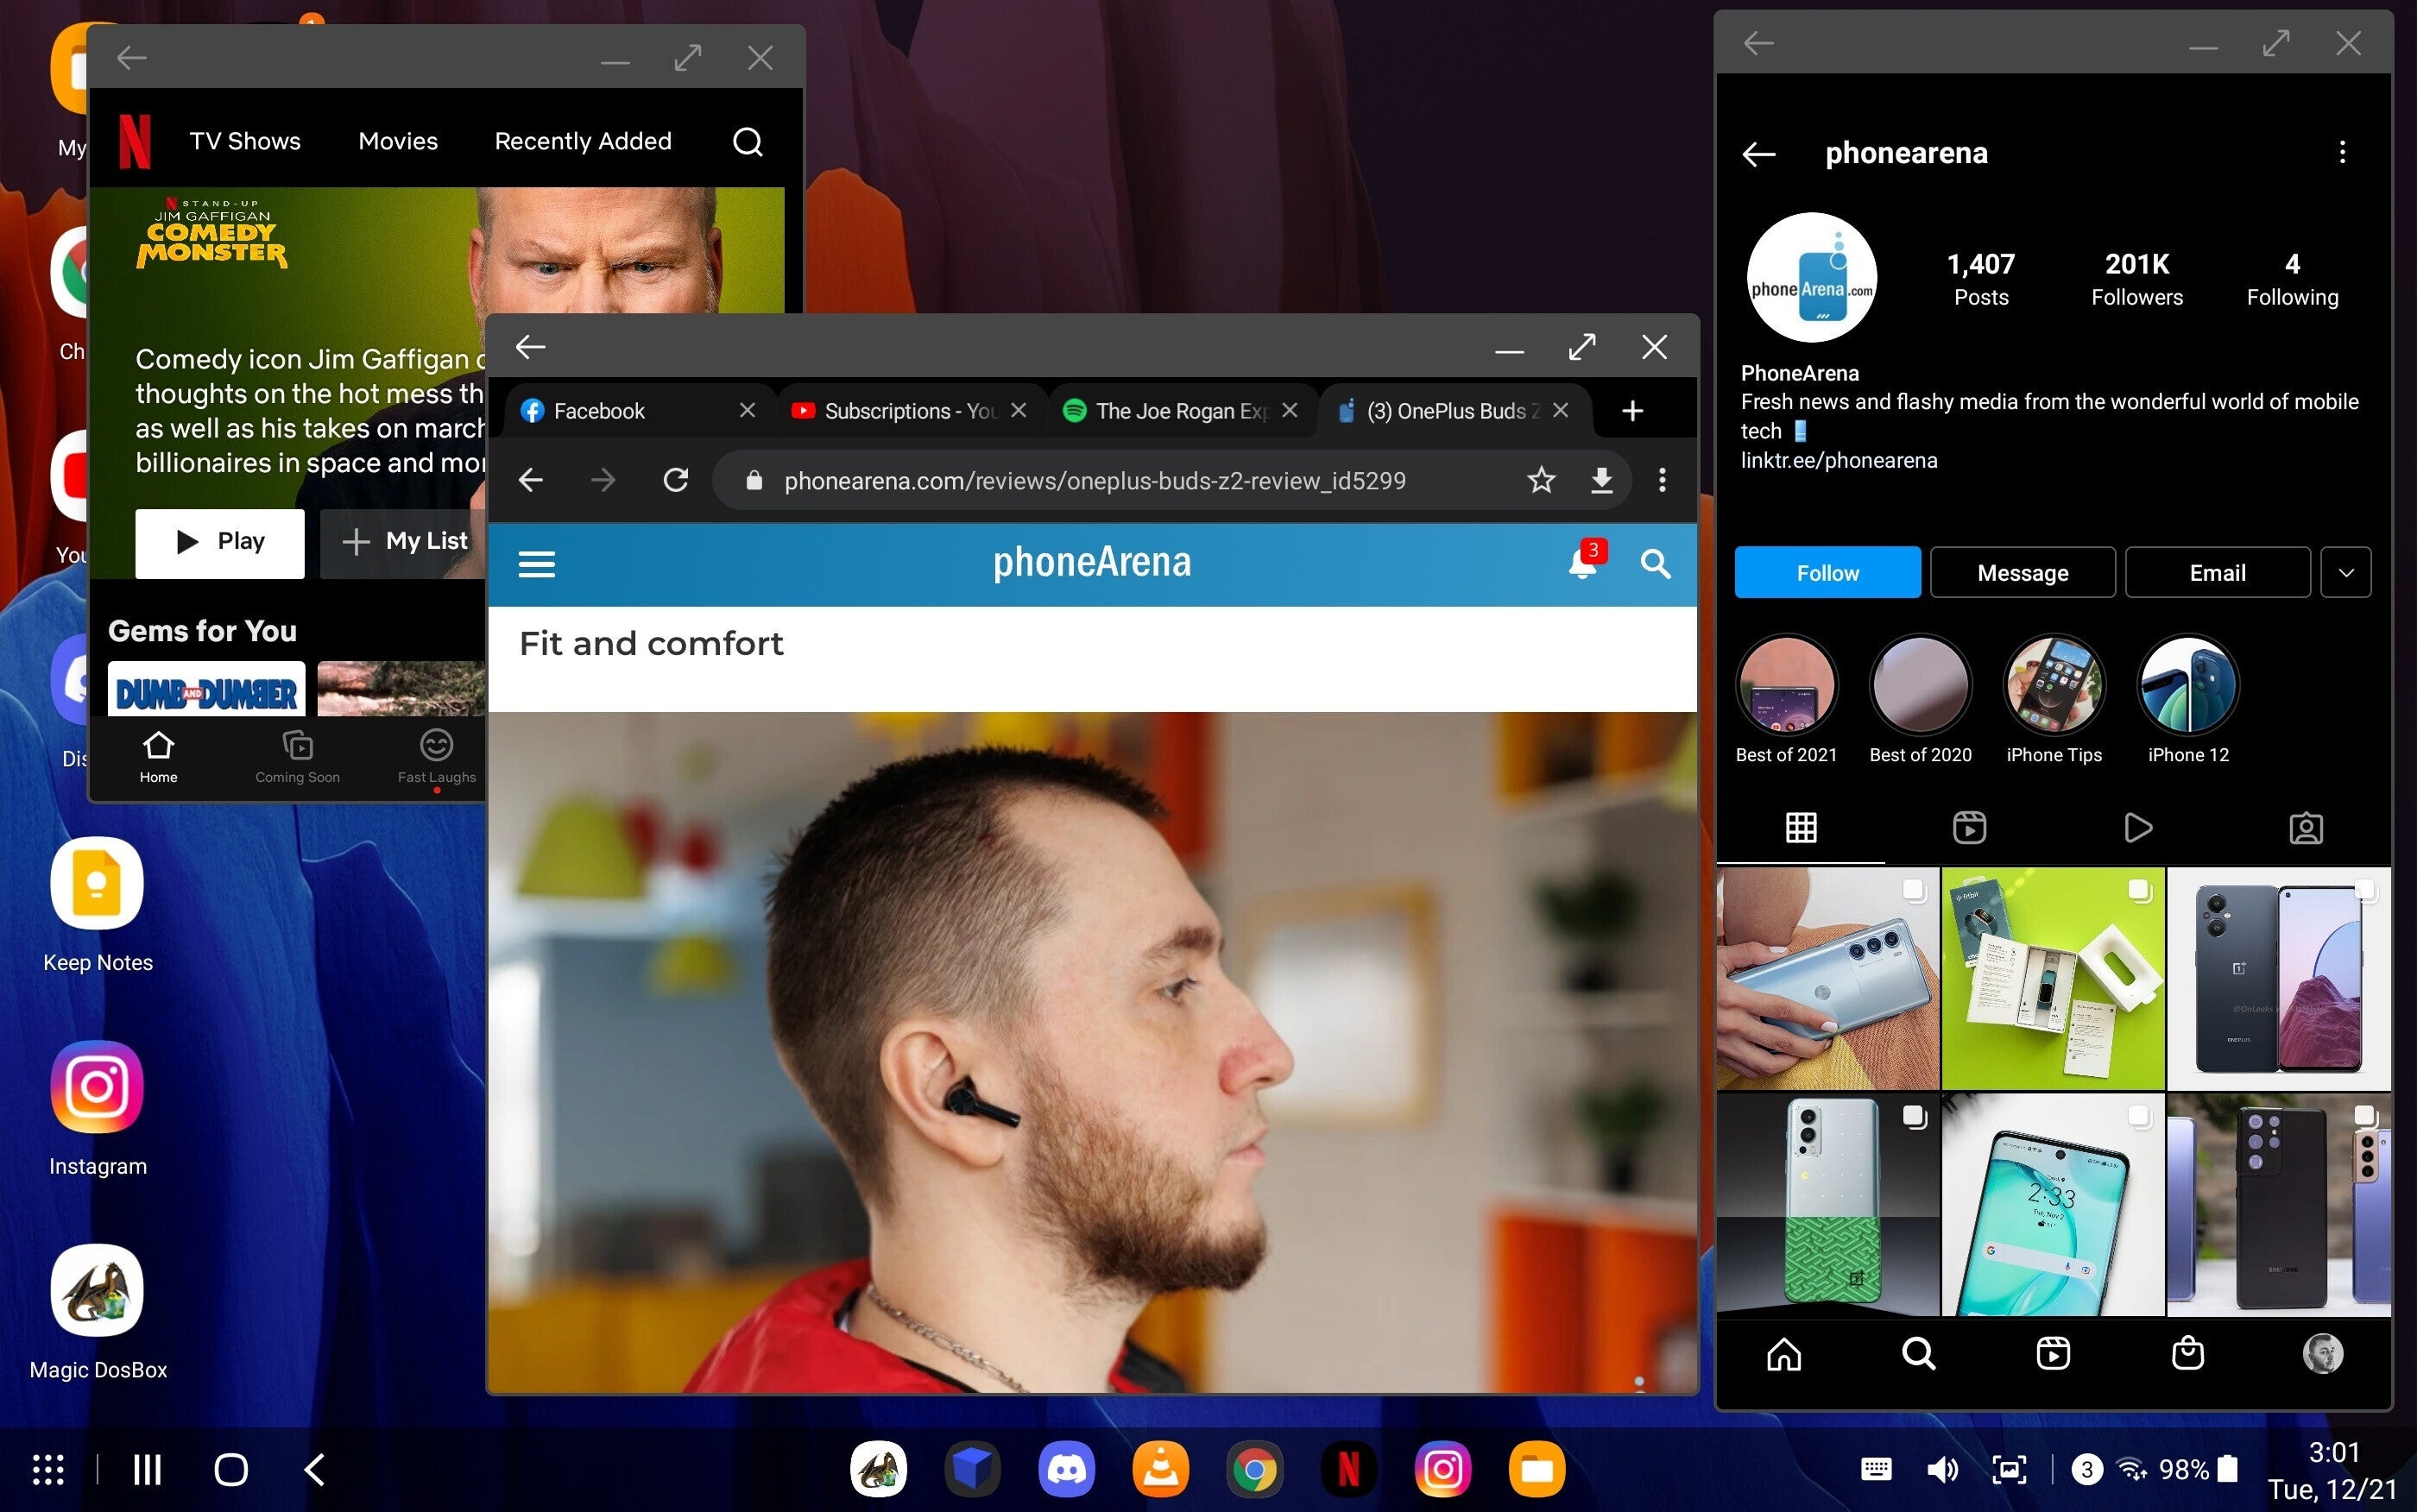 Samsung DeX in action - Samsung is improving the Android tablet experience in ways Google never bothered to (LumaFusion on Galaxy Tab S8)